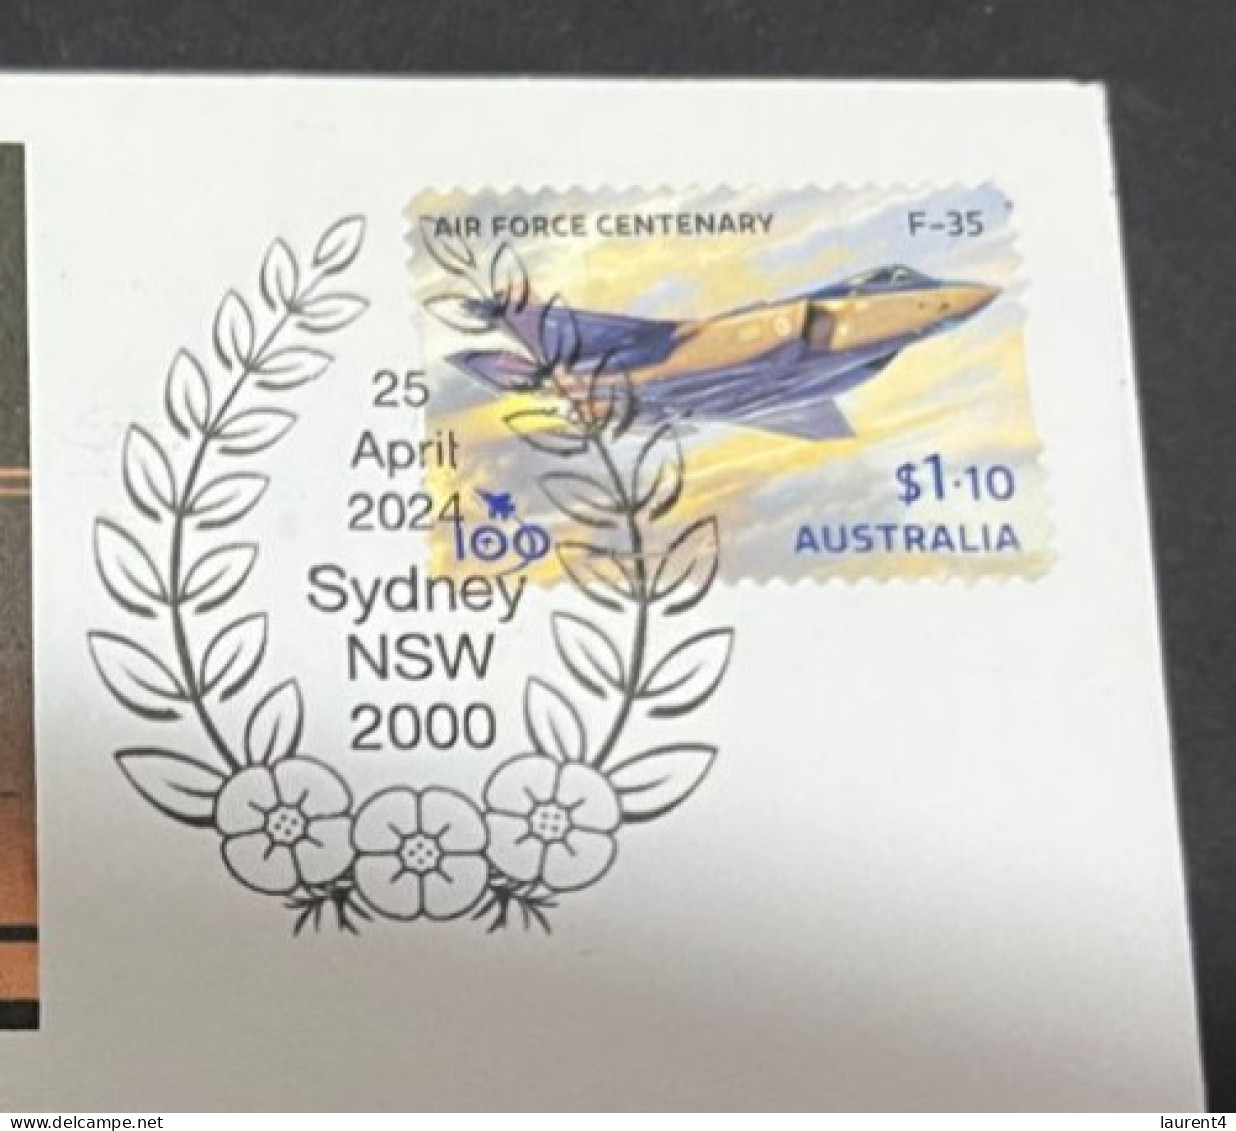 24-4-2024 (2 Z 52) Australia ANZAC 2024 - Special Cover Postmarked 25 April 2024 (War Memorial / Air Force) - Militares